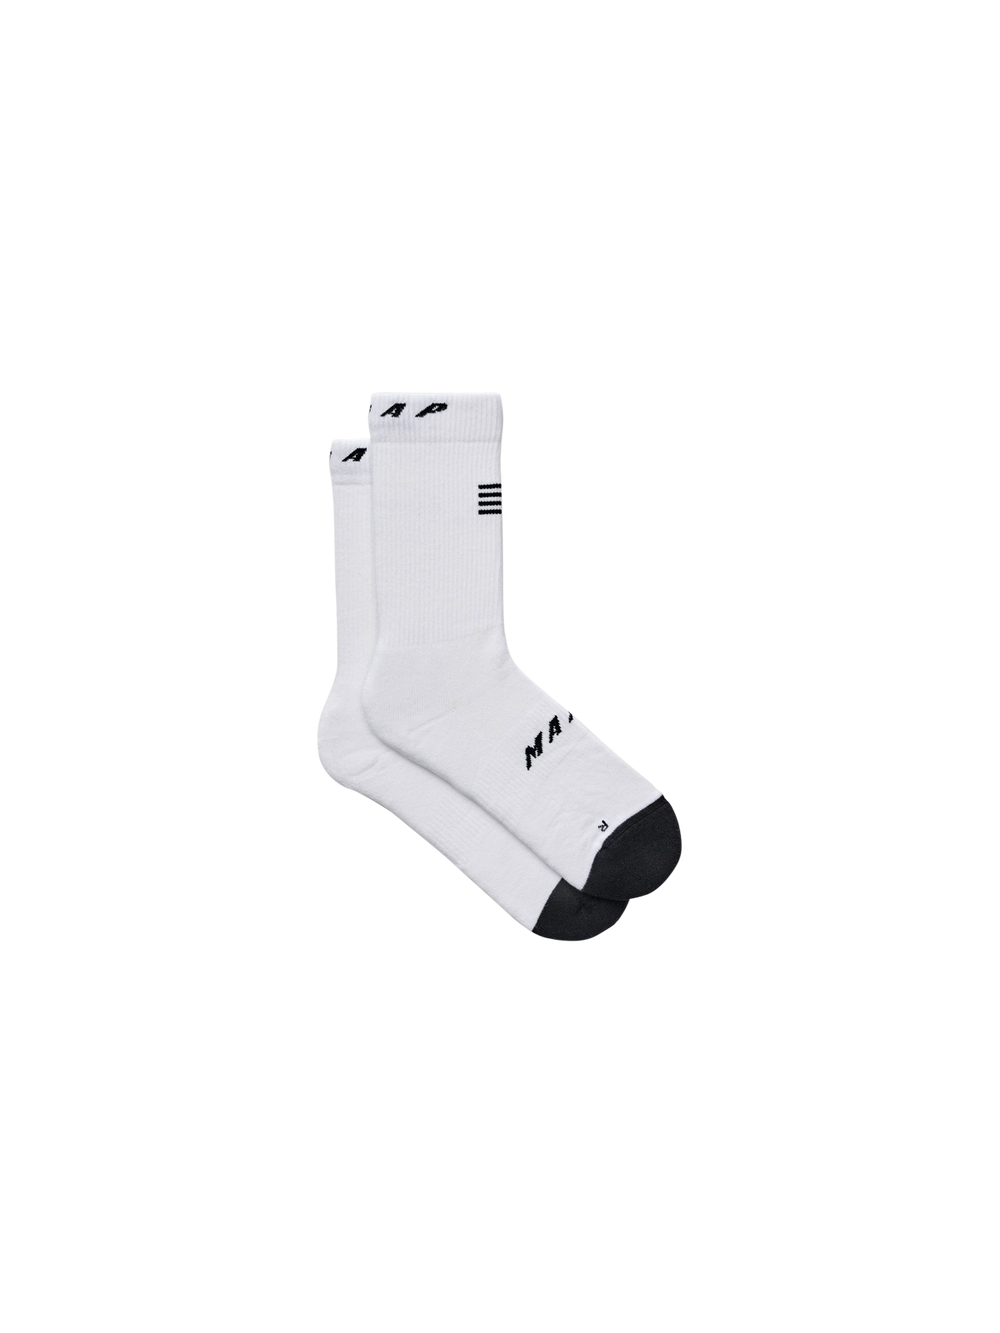 Product Image for Evade Sock